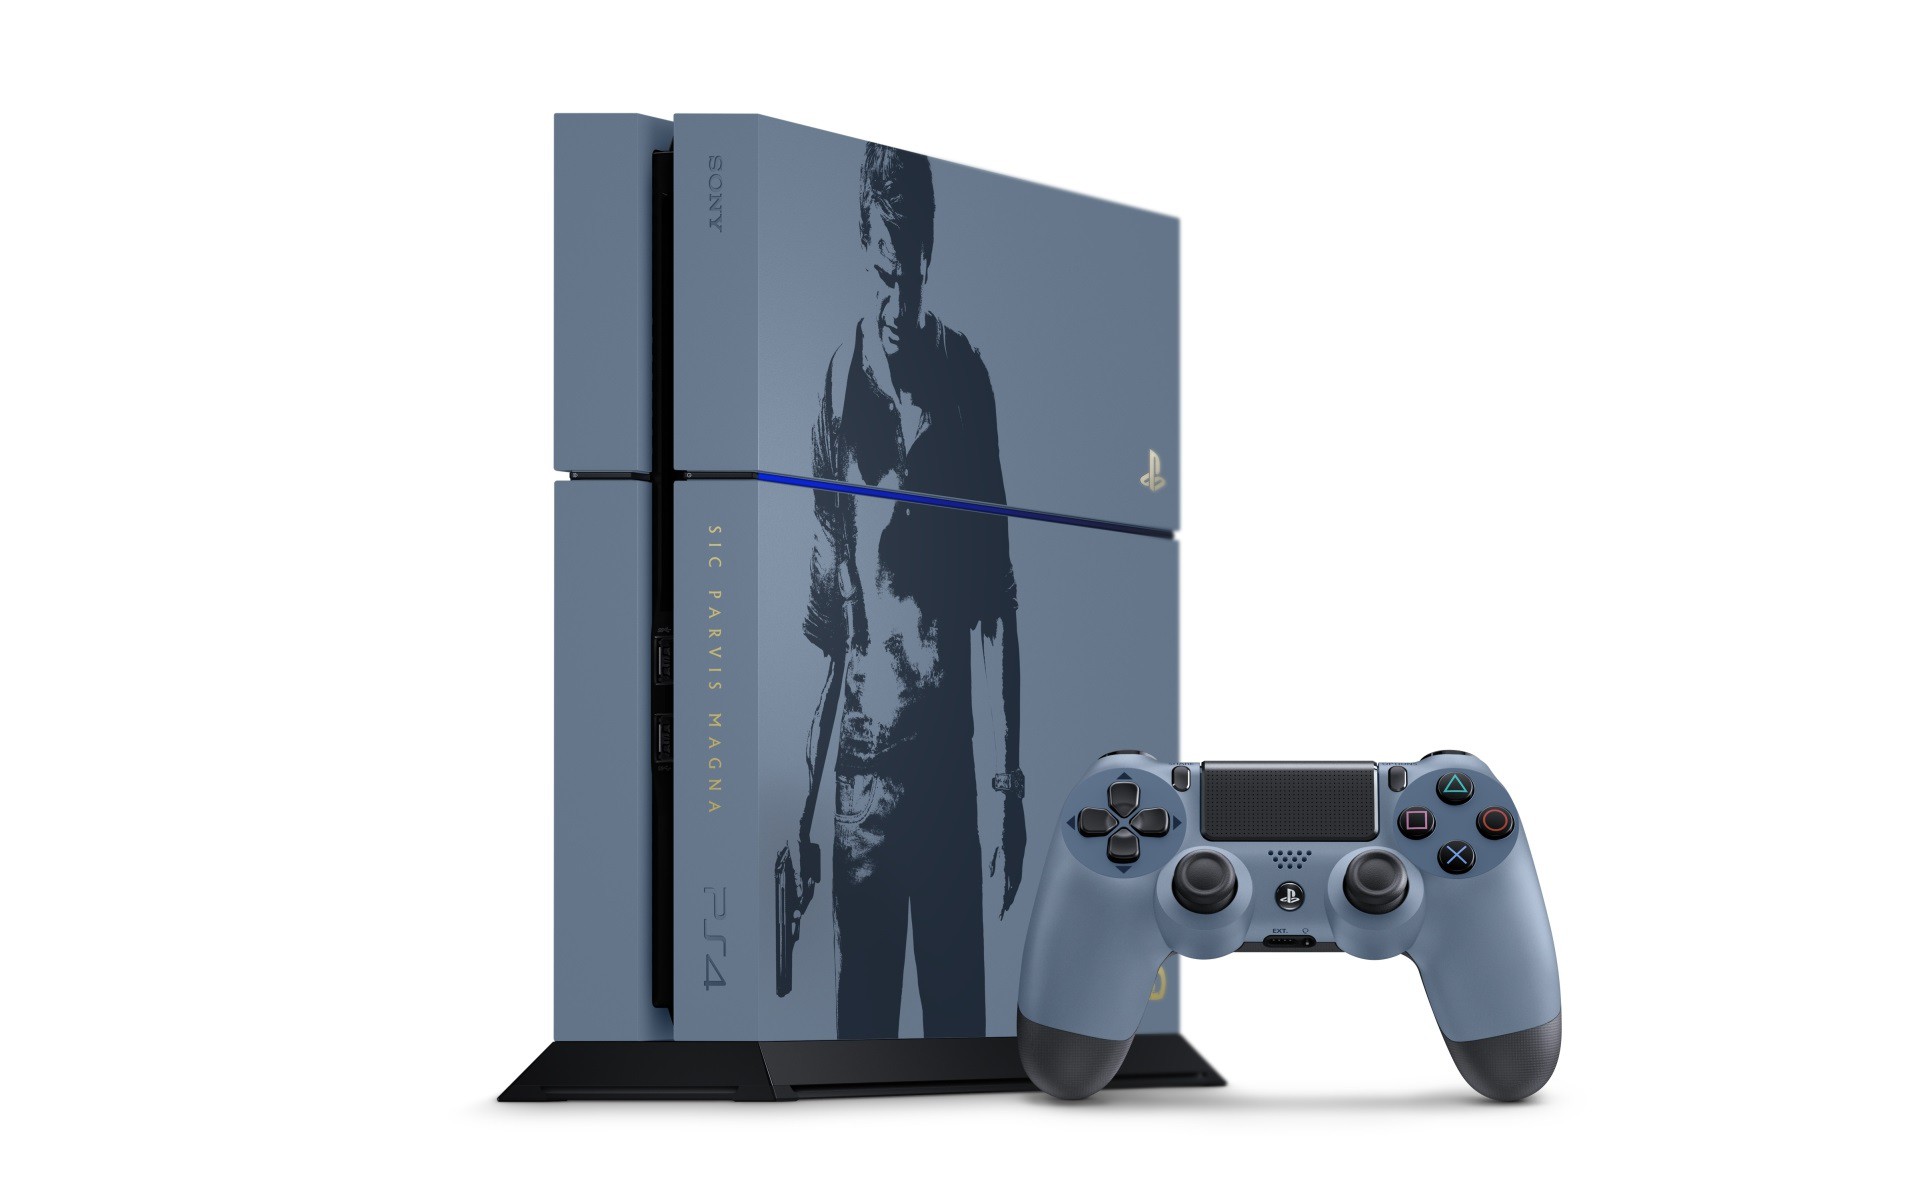 Ps4 типы. Ps4 Uncharted 4 Limited. Ps4 Uncharted 4 Limited Edition. Uncharted 4 ps4. PLAYSTATION 4 Uncharted Edition.